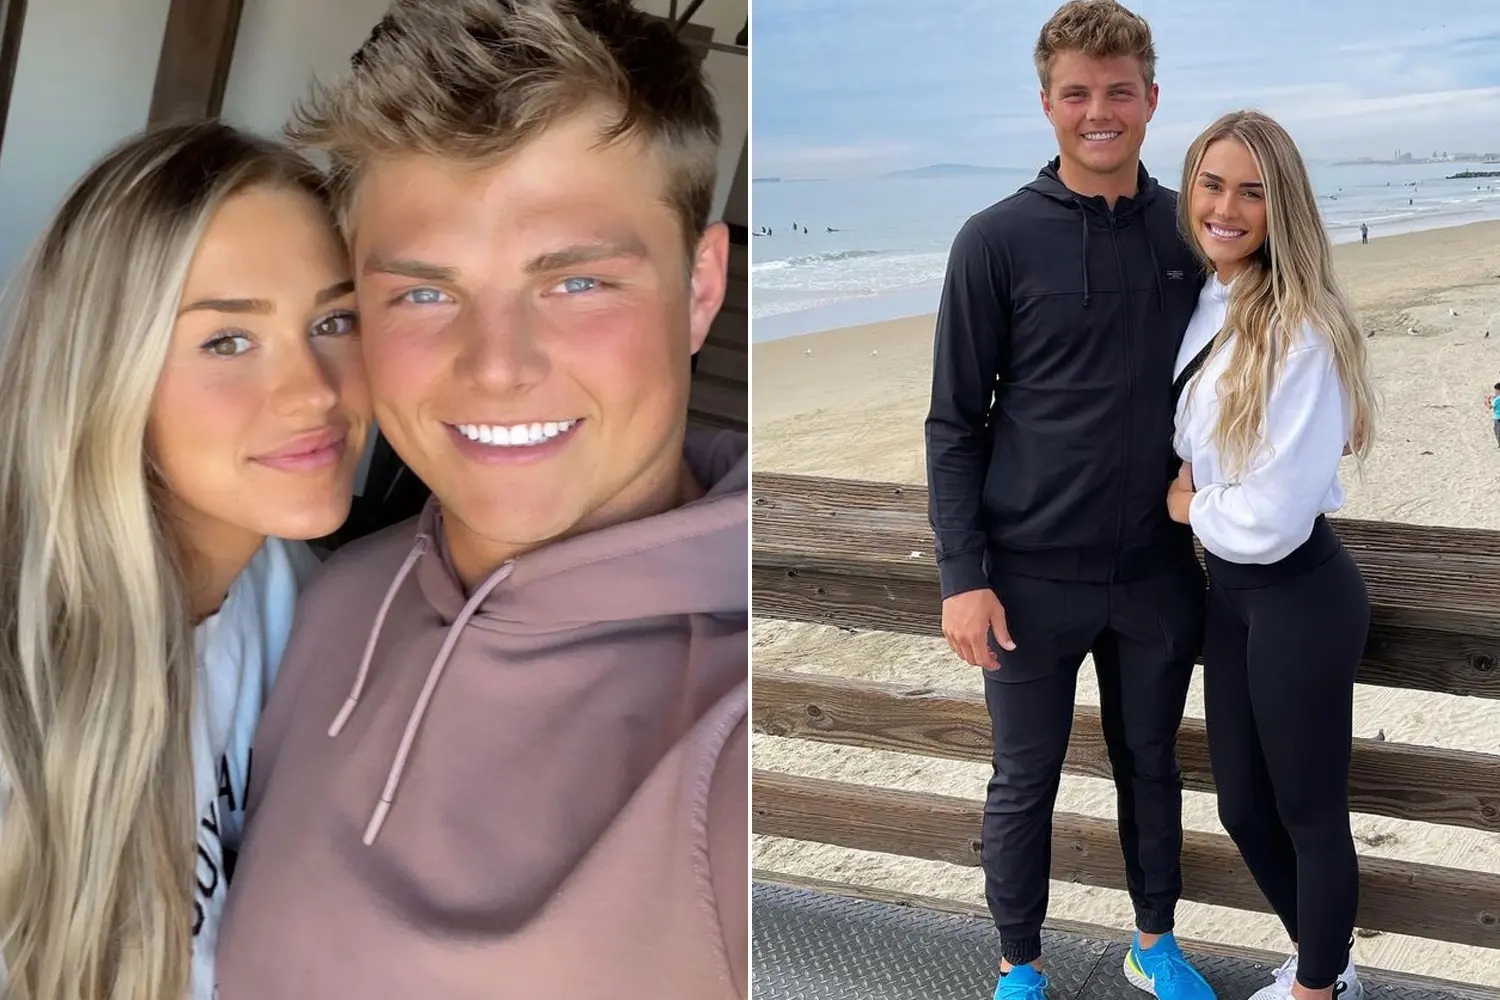 Dax Milne, once Zach's closest friend, is now dating Abbey.